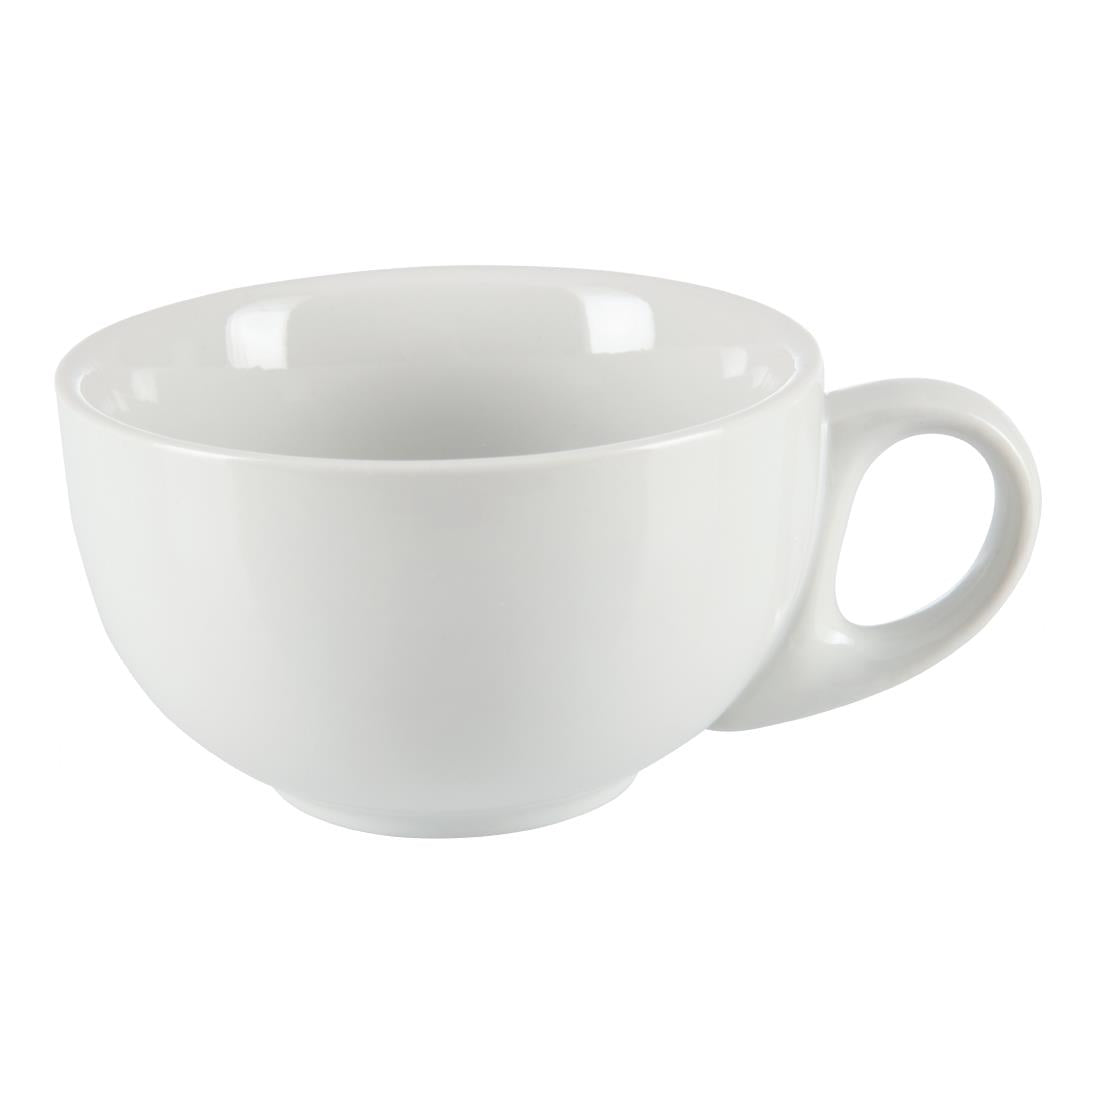 Olympia Whiteware Cappuccino Cups 10oz 284ml (Pack of 12)